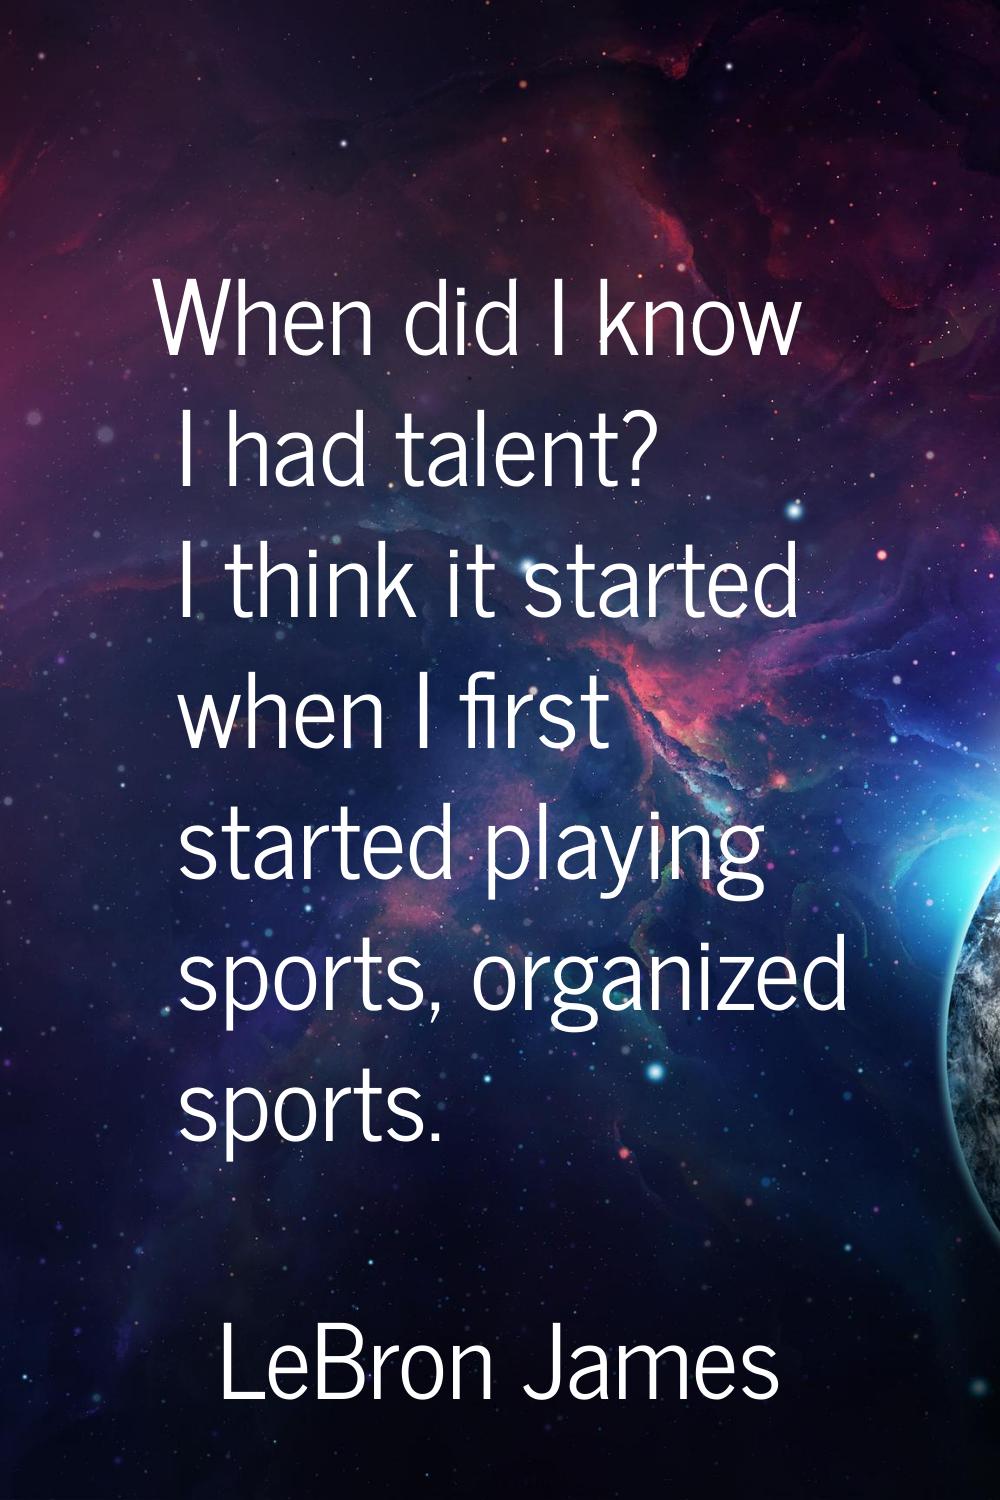 When did I know I had talent? I think it started when I first started playing sports, organized spo